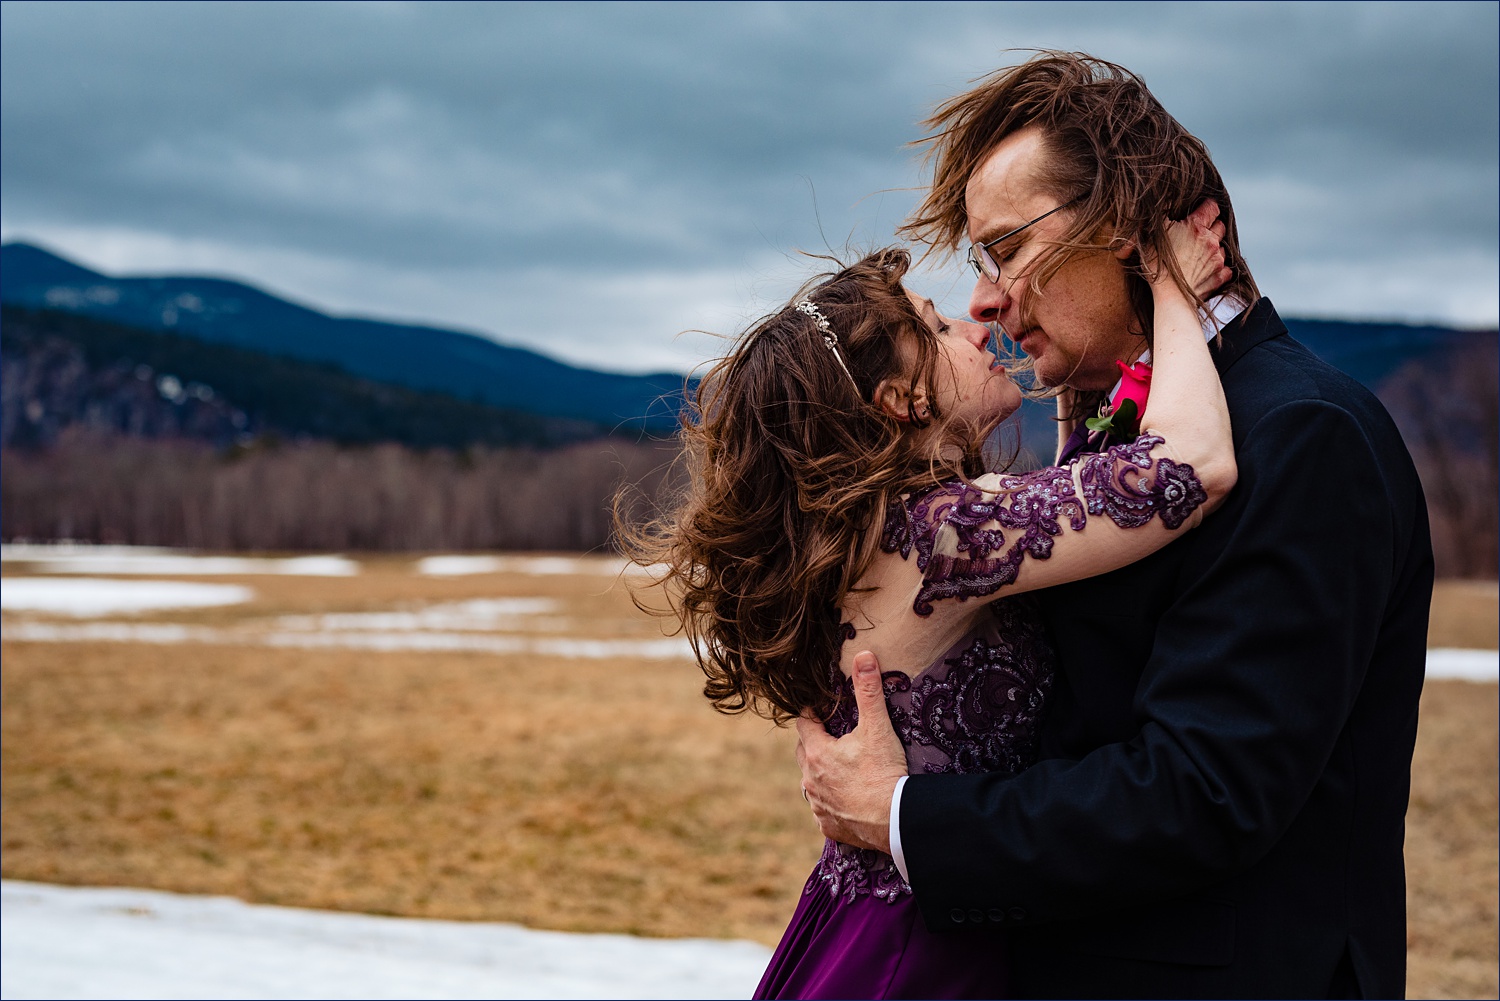 The groom holds tight to his bride as they keep each other warm in the snowy White Mountains after they eloped in New Hampshire